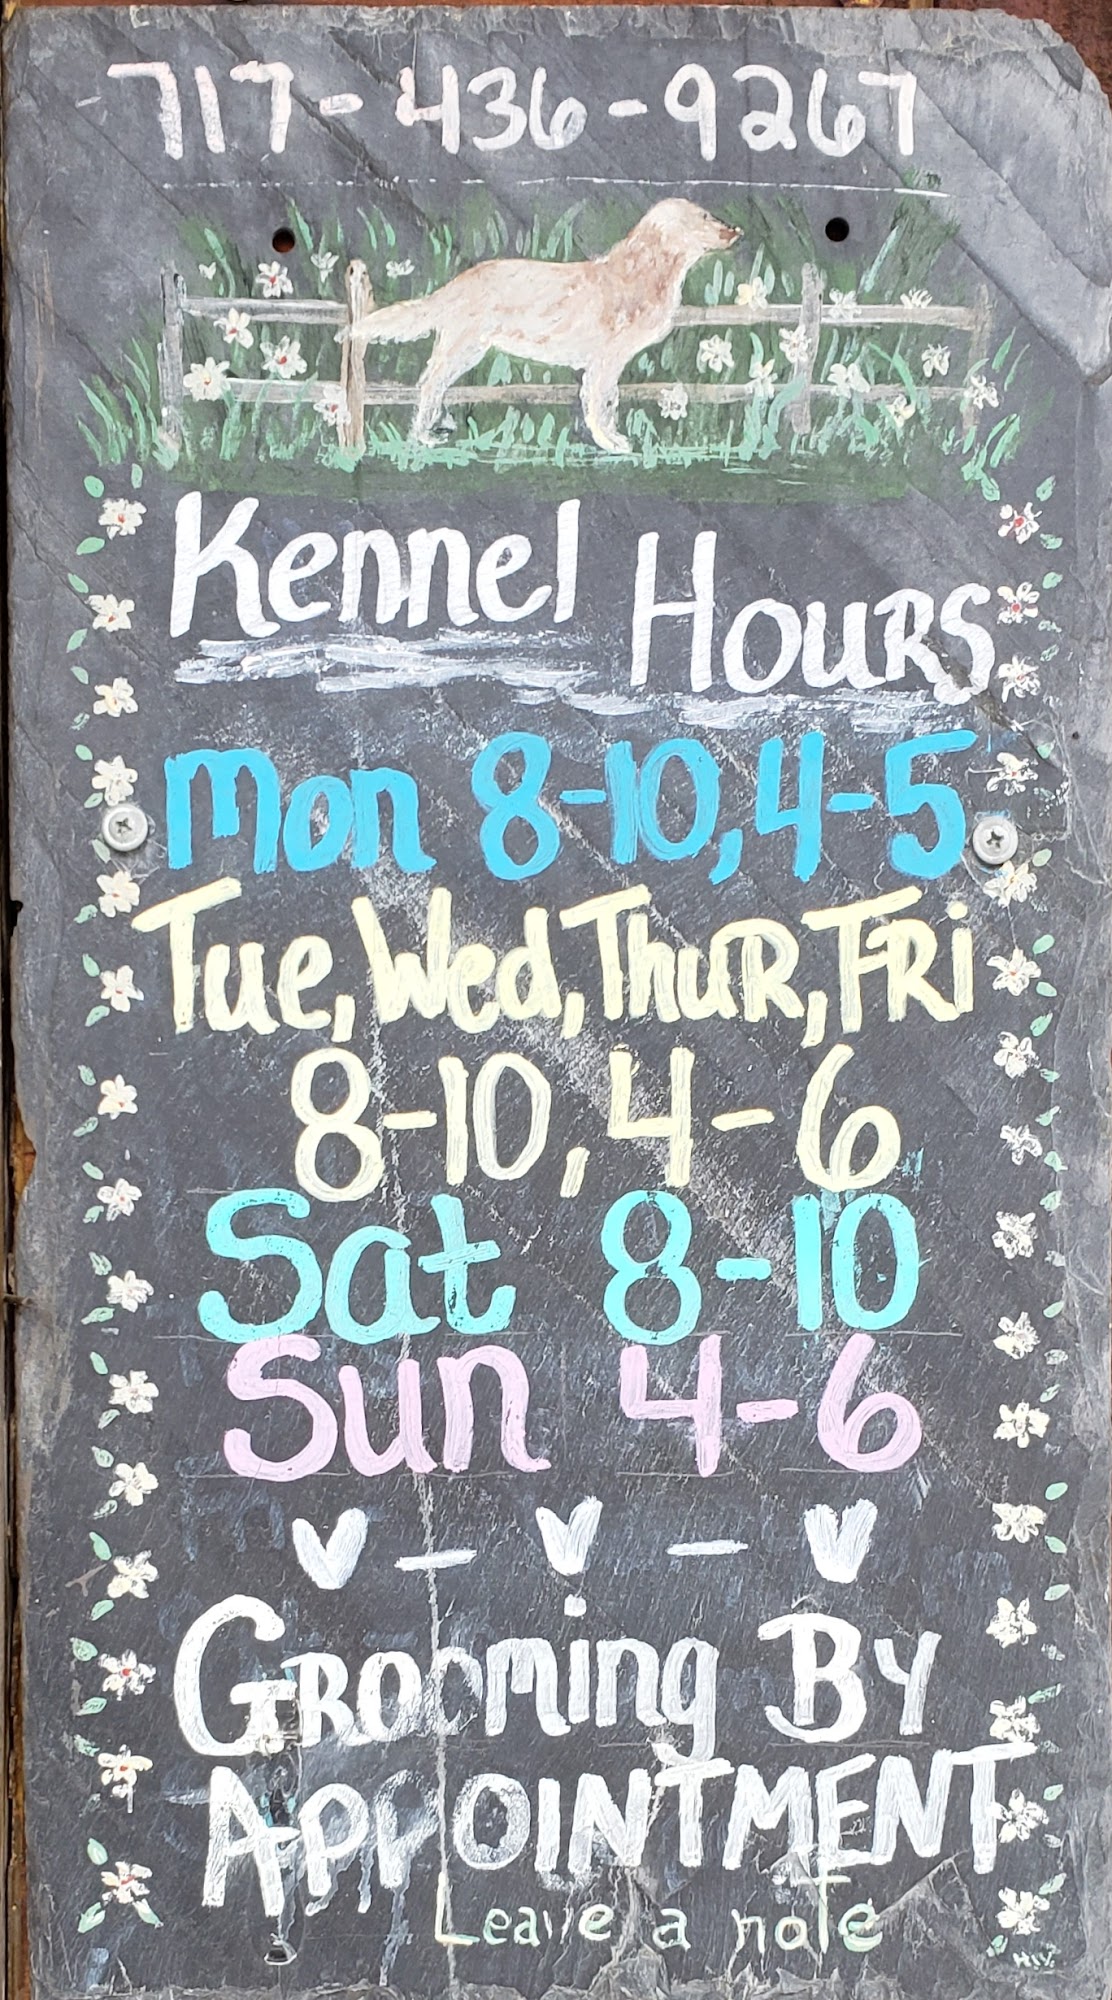 Ernest Hill Kennels Boarding and Grooming 218 Bossinger Rd, Mifflintown Pennsylvania 17059